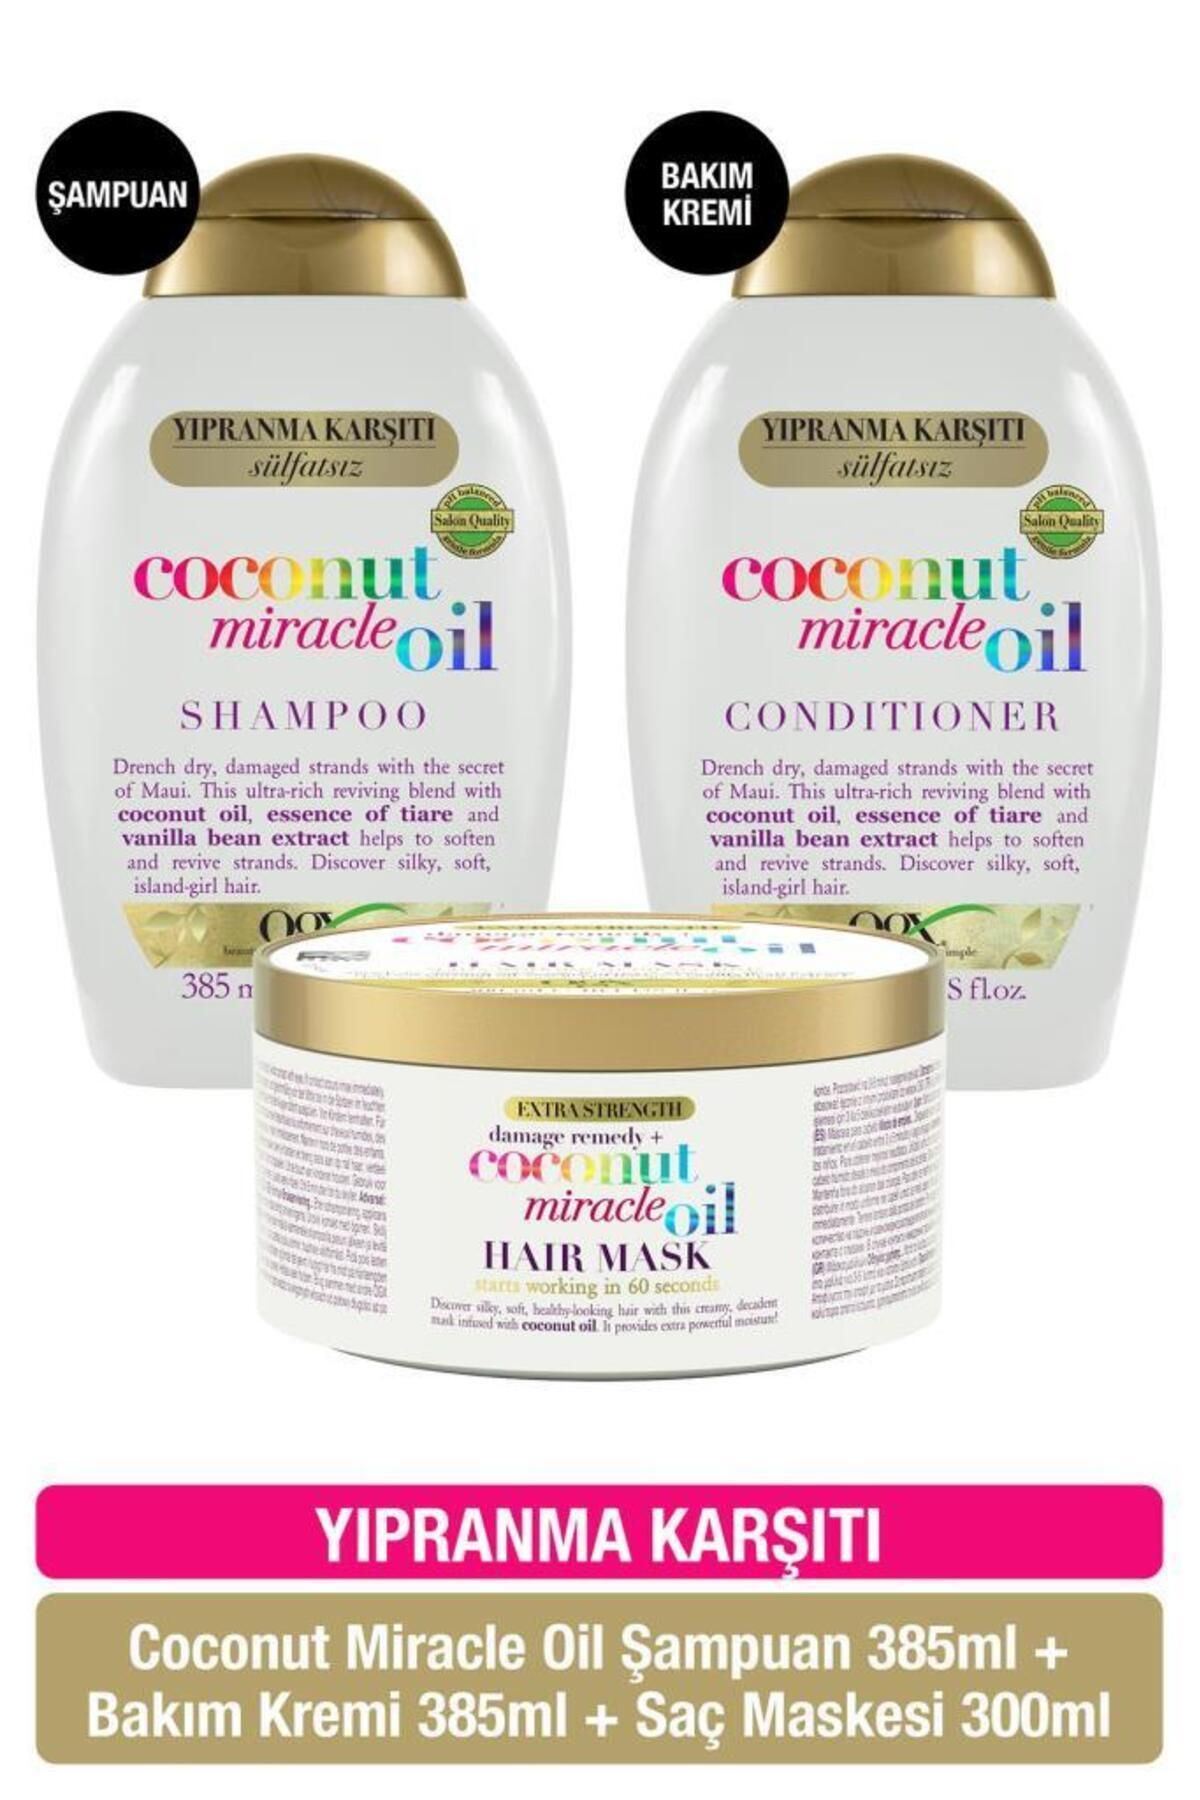 OGX Anti-Wear Coconut Miracle Oil Shampoo Conditioner Hair Mask